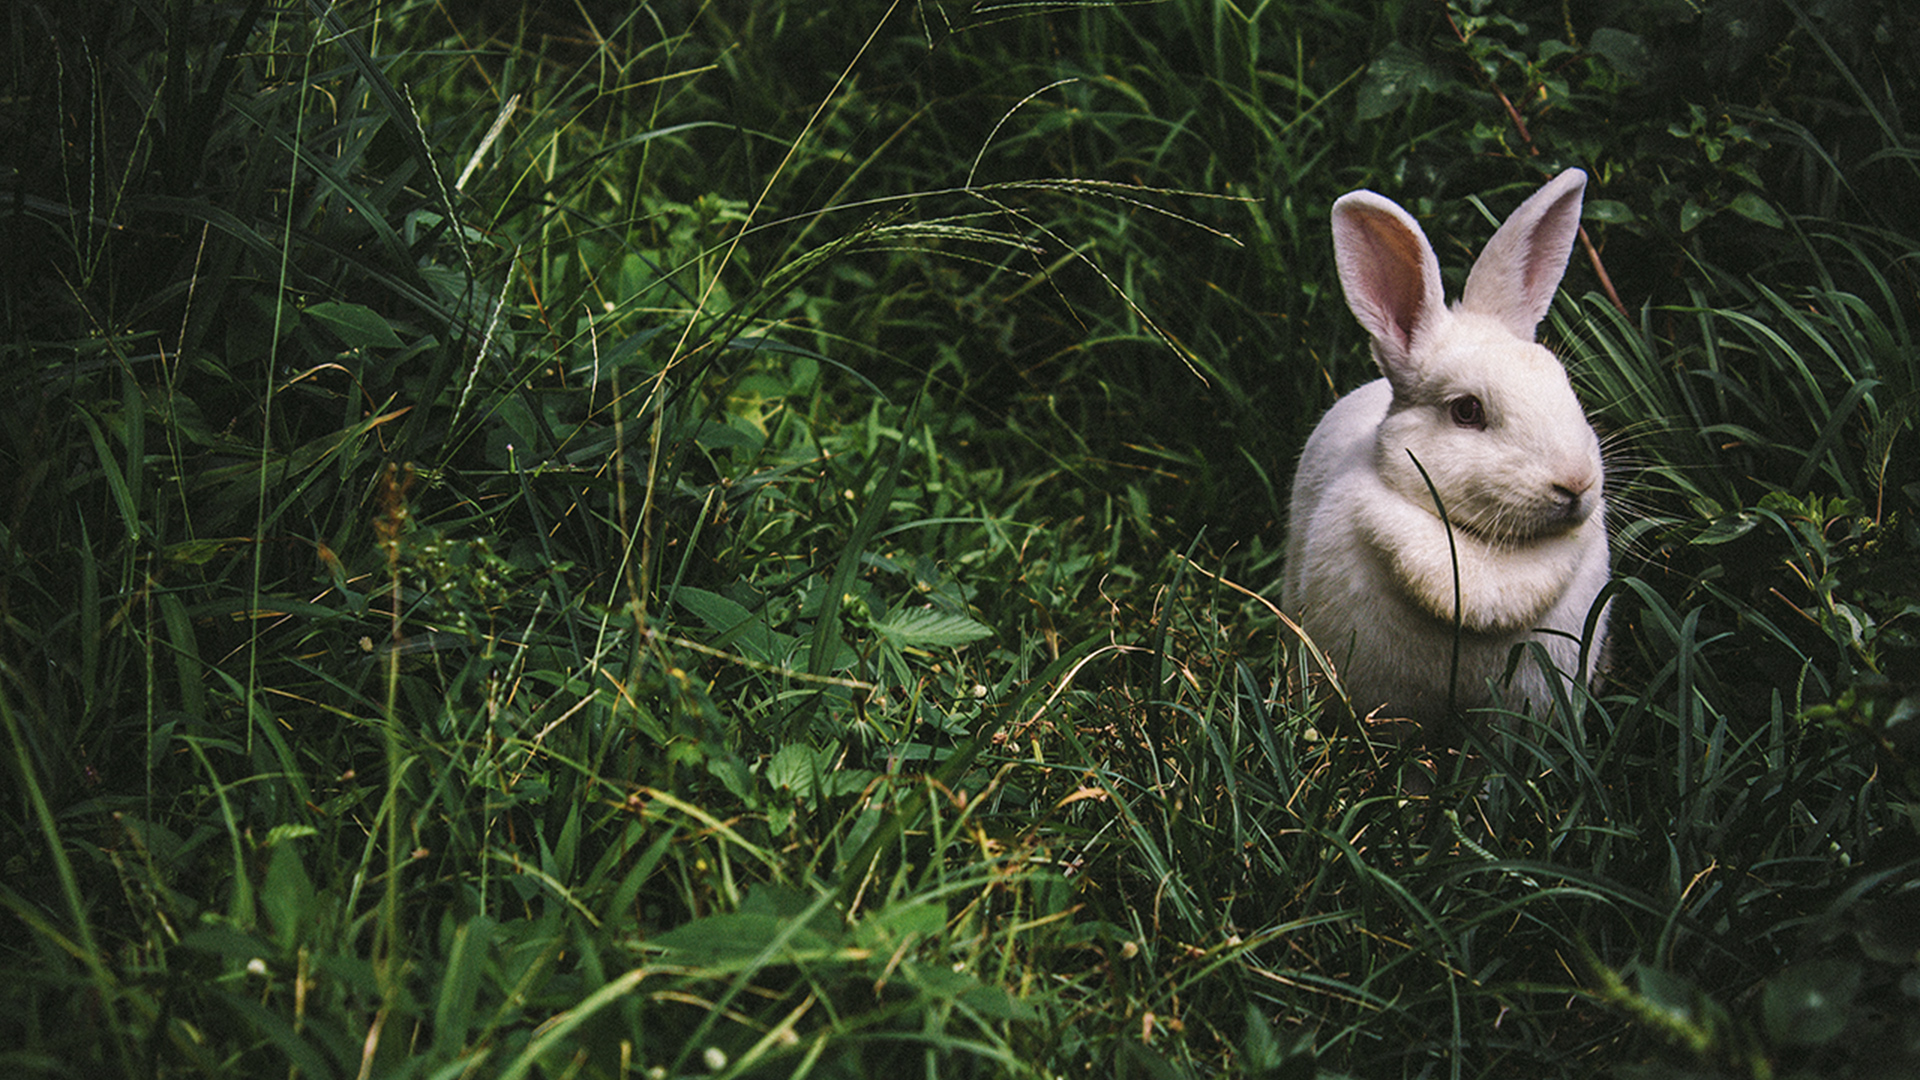 A rabbit sat in the grass